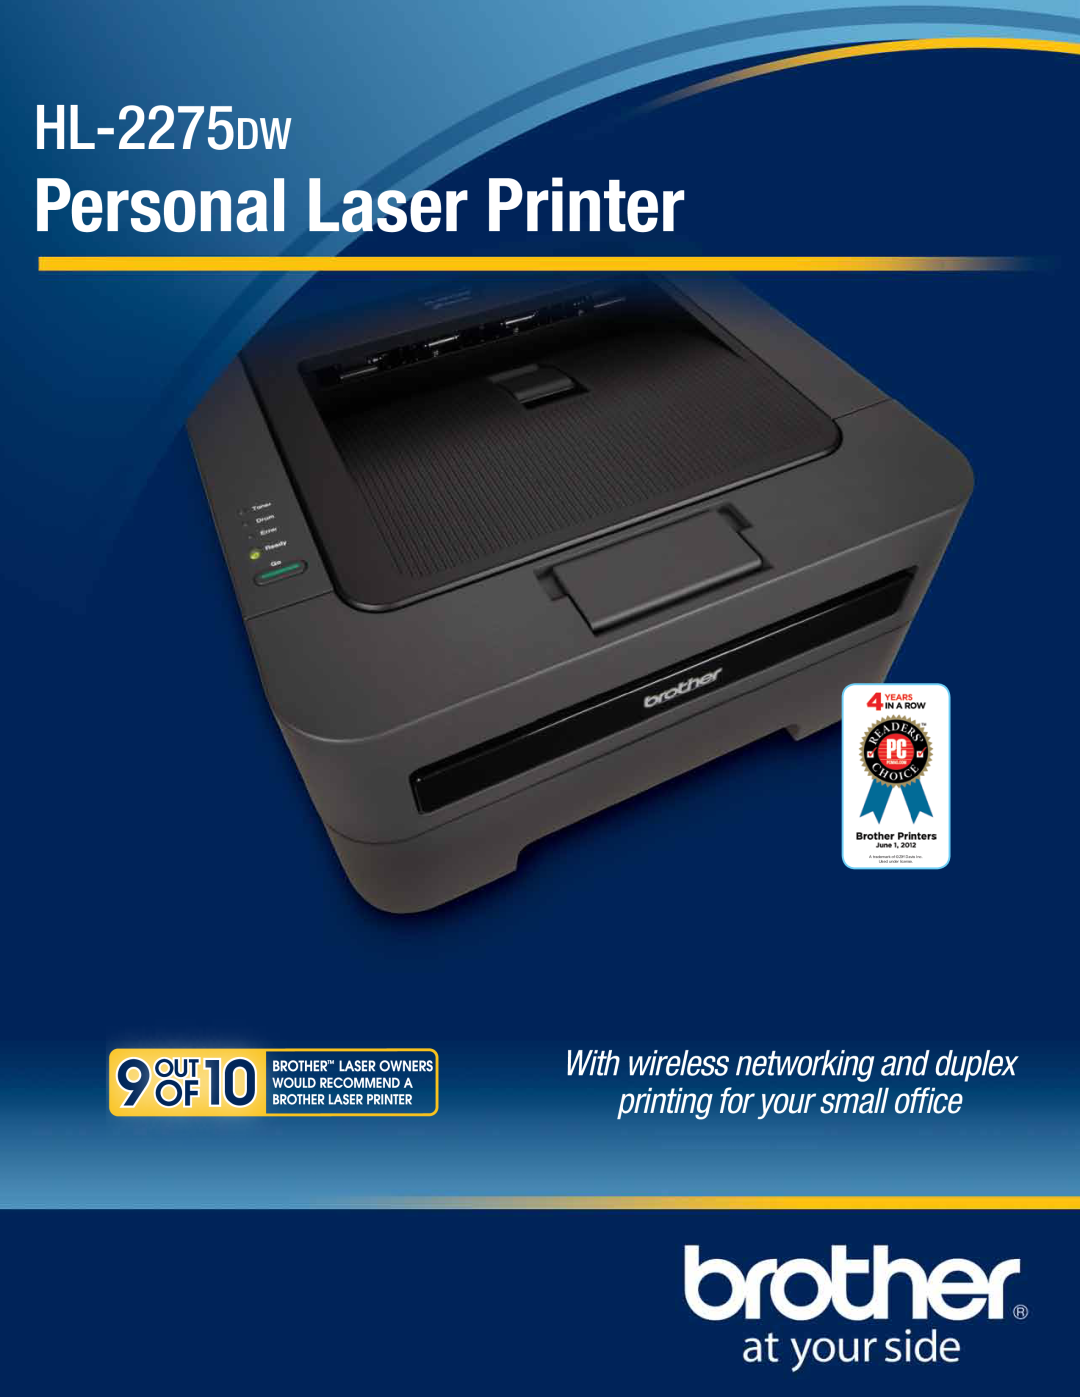 Brother HL-2275DW manual Personal Laser Printer, HL-2275dw, A trademark of Ziff Davis Inc Used under license 